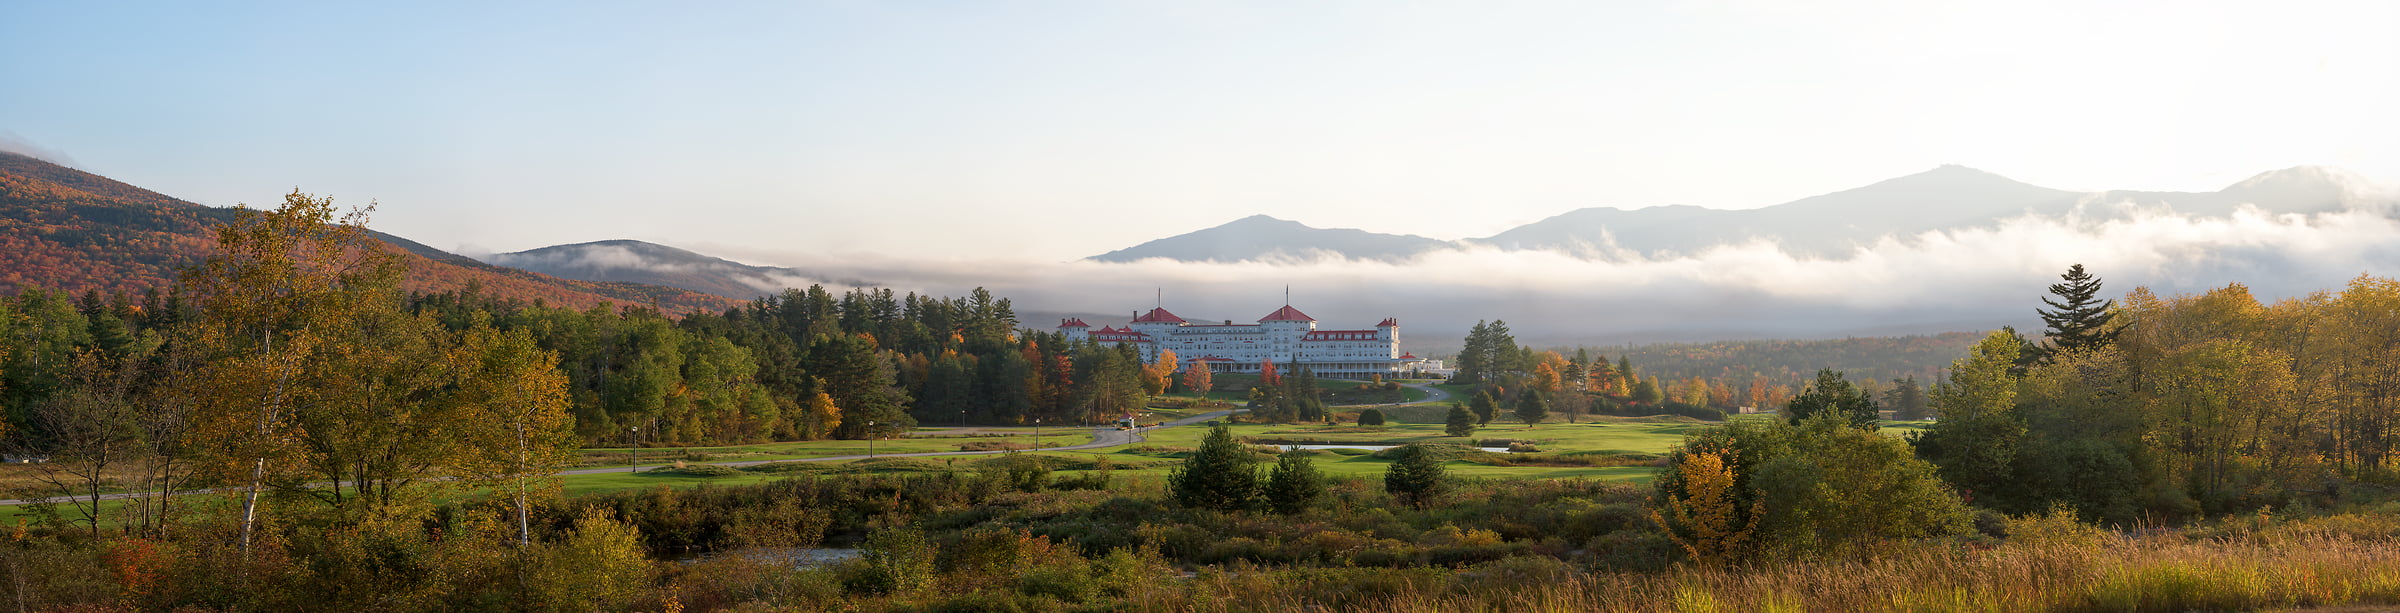 809 megapixels! A very high resolution, large-format VAST photo print of Mount Washington Hotel; landscape photograph created by Aaron Priest in Bretton Woods, Carroll, New Hampshire